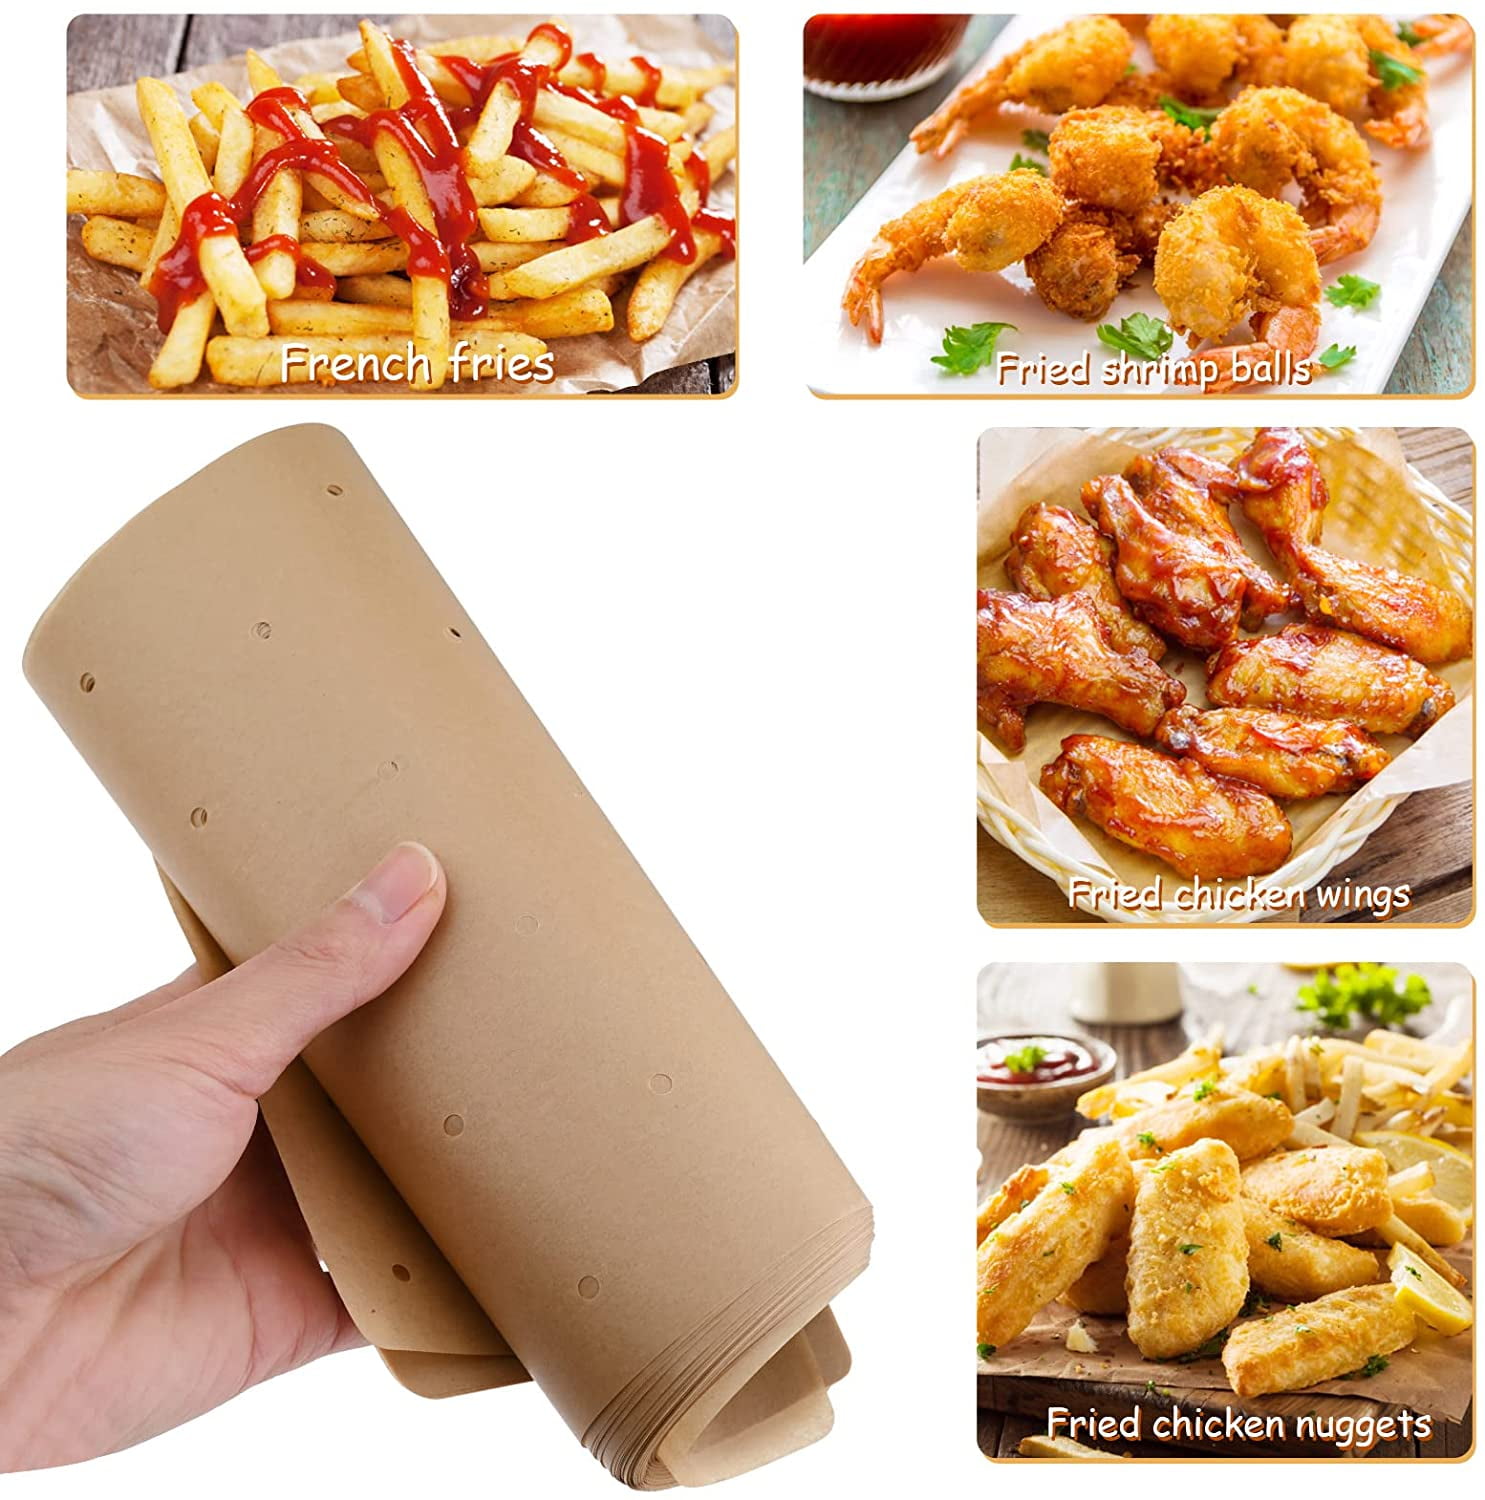 Unbleached Air Fryer Parchment Paper, 100 PCS Perforated Square Air Fryer  Liners for Ninja Foodi Grill 5-in-1 AG301 4qt Air Fryer 